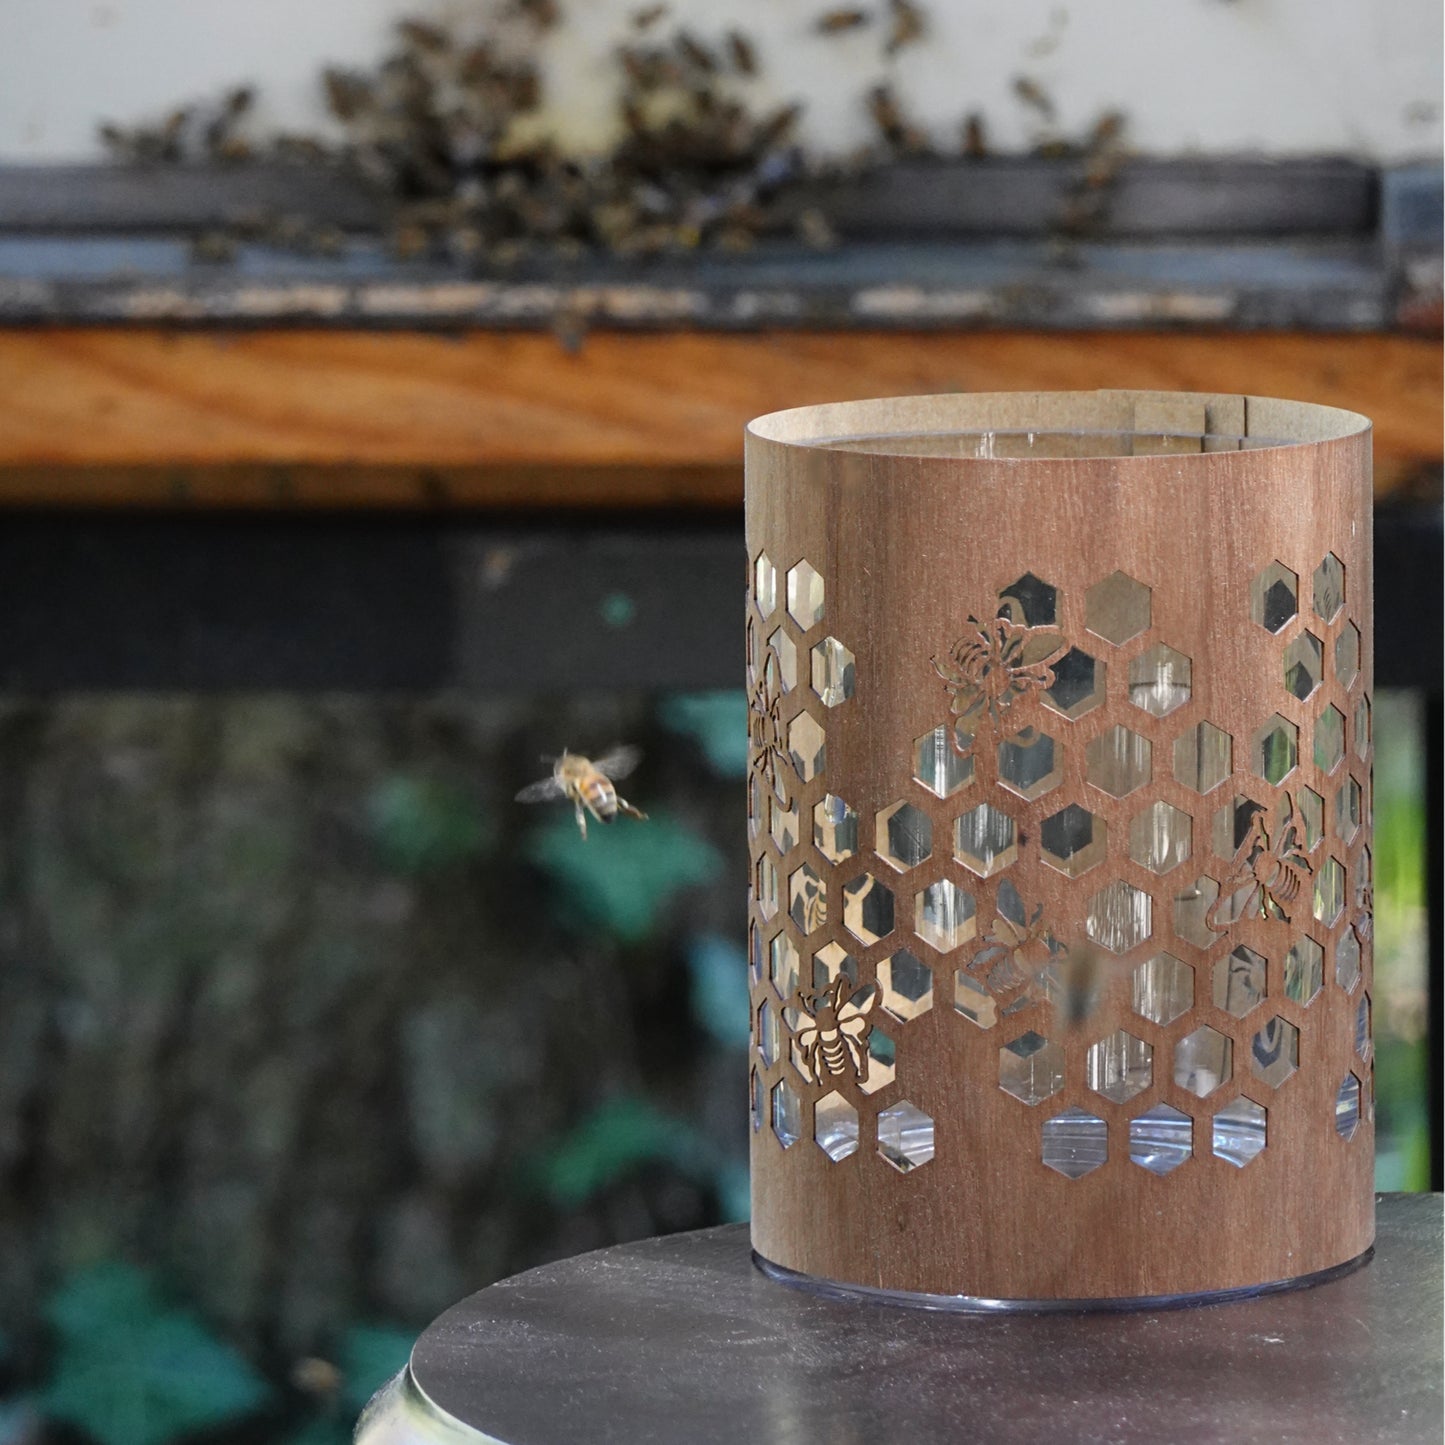 honeybee design lantern - wood and glass outside with a honeybee flying away from it